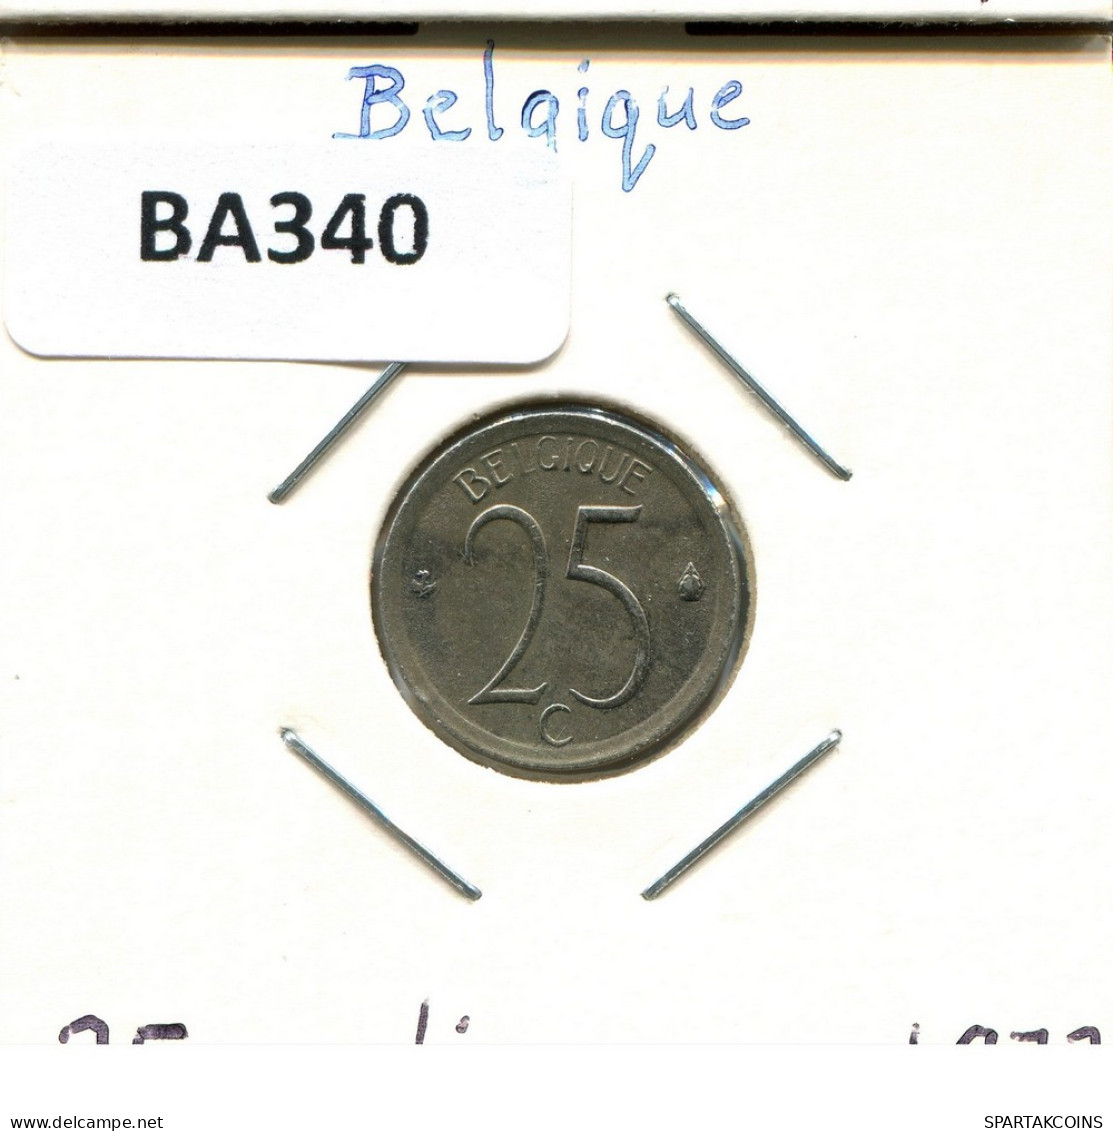 25 CENTIMES 1973 FRENCH Text BELGIUM Coin #BA340.U - 25 Centimes